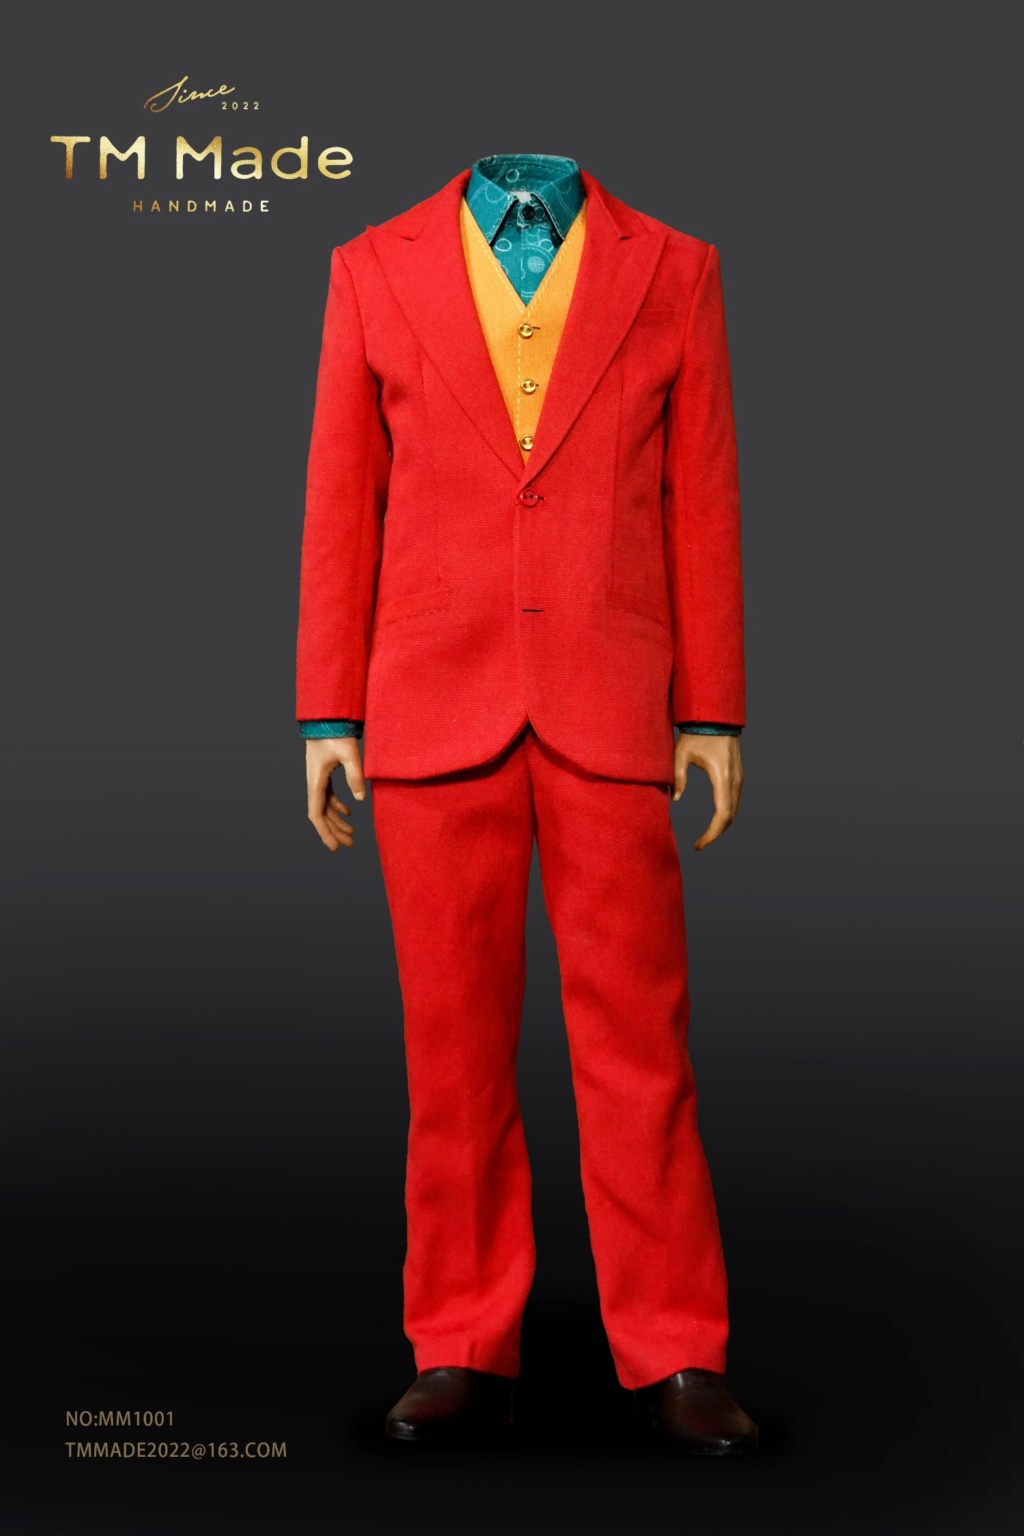 NEW PRODUCT: TM MADE MM1001 - 1/6 Scale Red Suit Set (Joker) 12251910